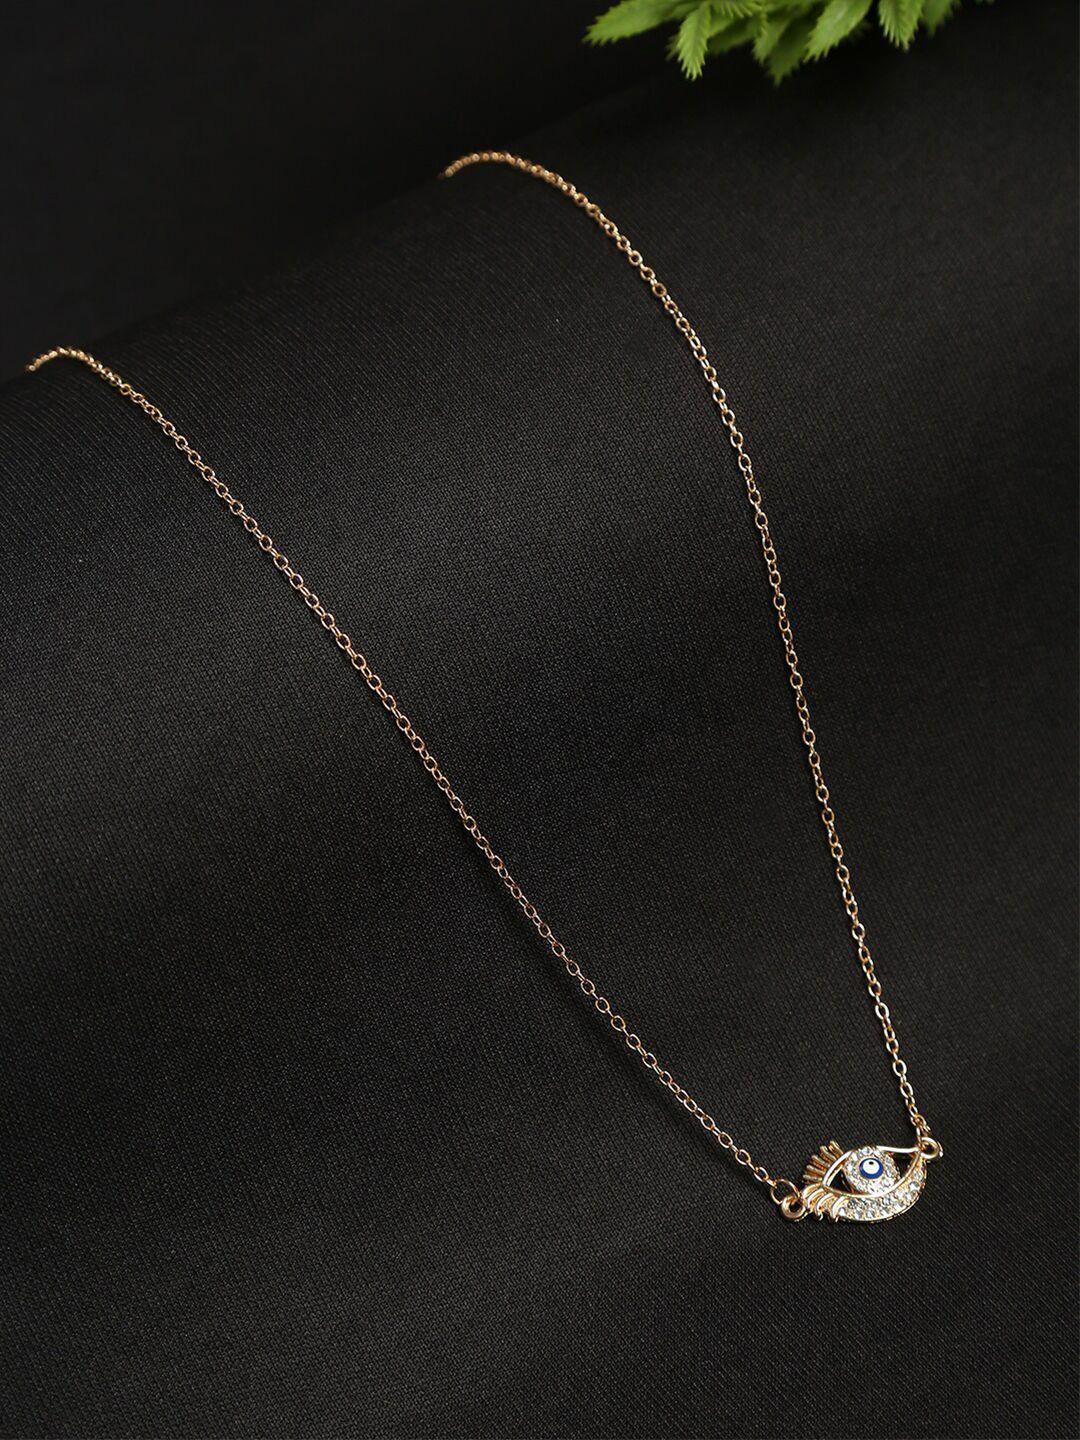 celena cole gold-toned & white gold-plated necklace